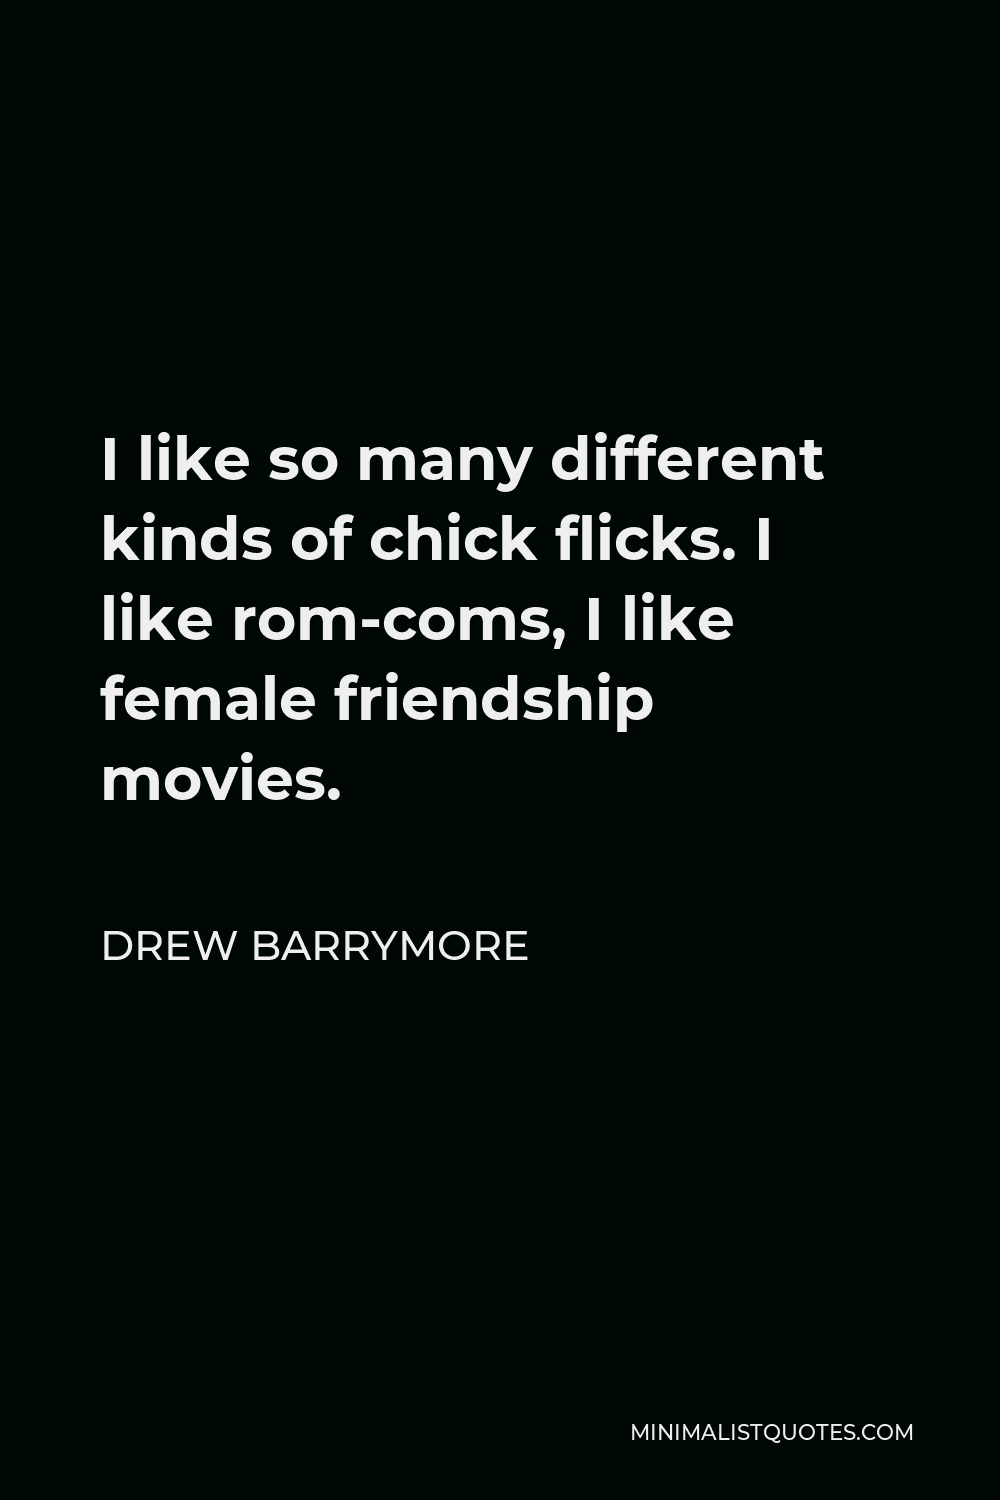 Drew Barrymore Quote - I like so many different kinds of chick flicks. I like rom-coms, I like female friendship movies.